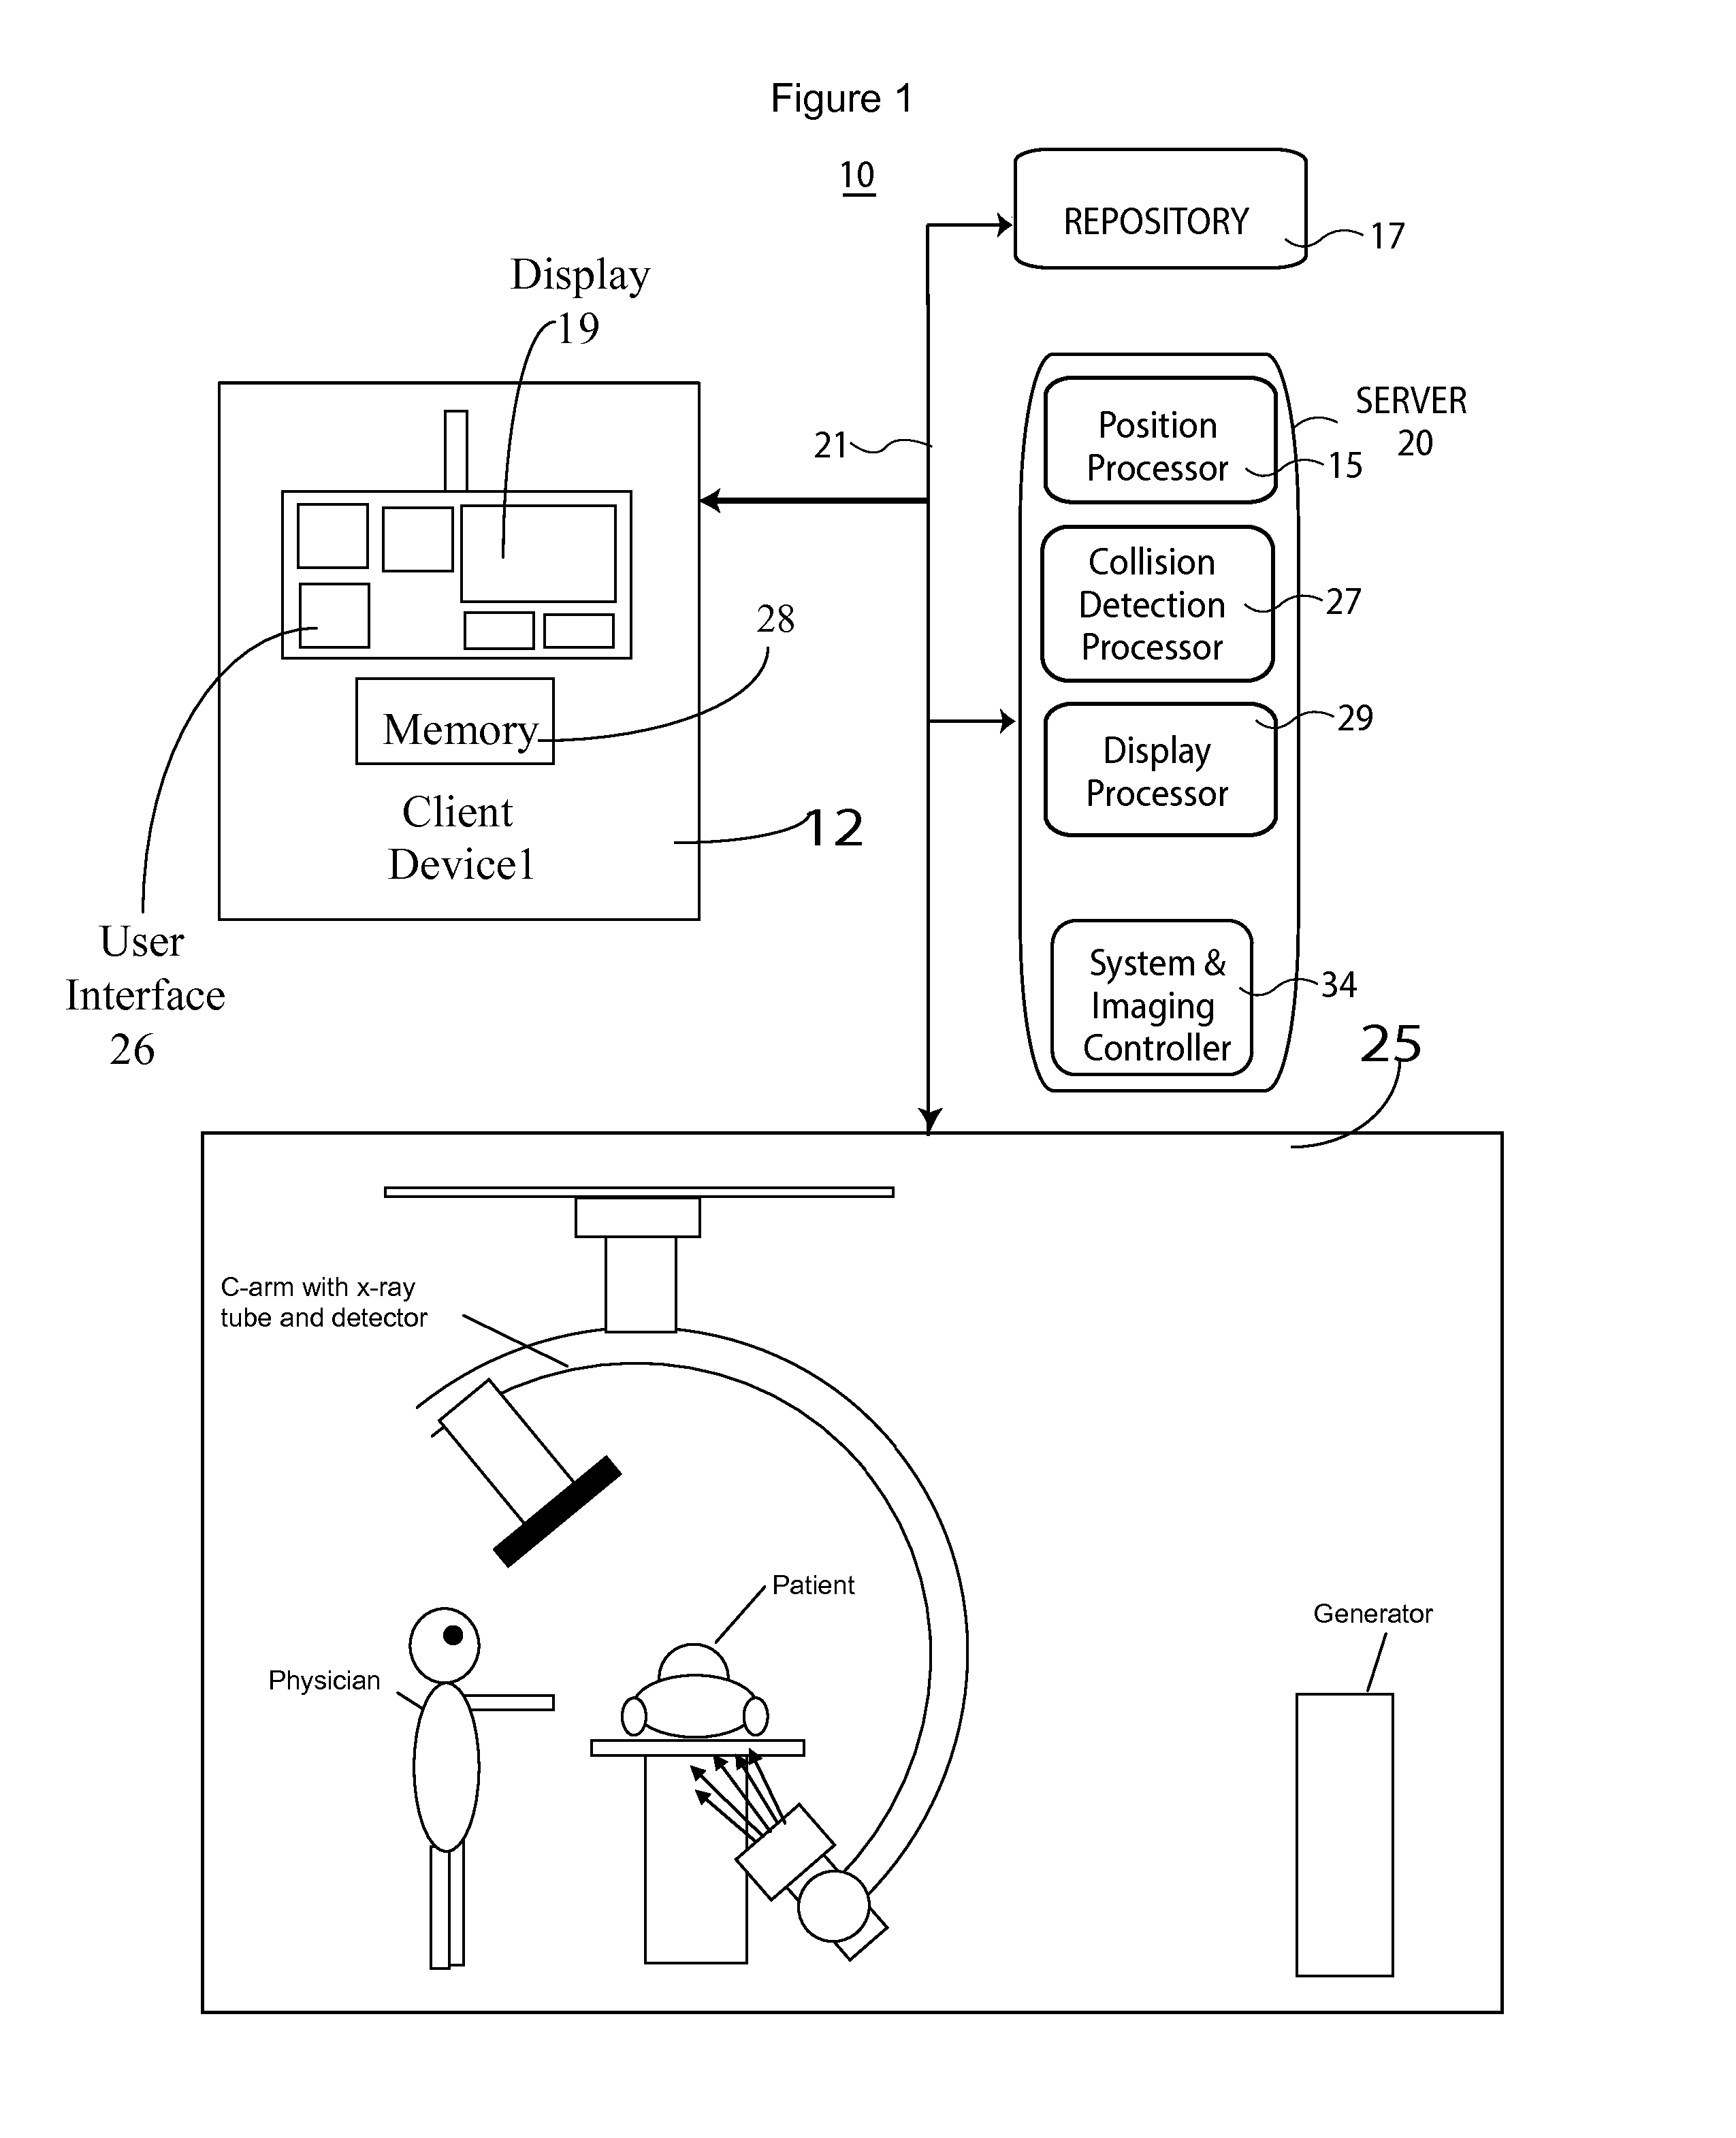 System for Preplanning Placement of Imaging Equipment and Medical Workers In an Operating Room